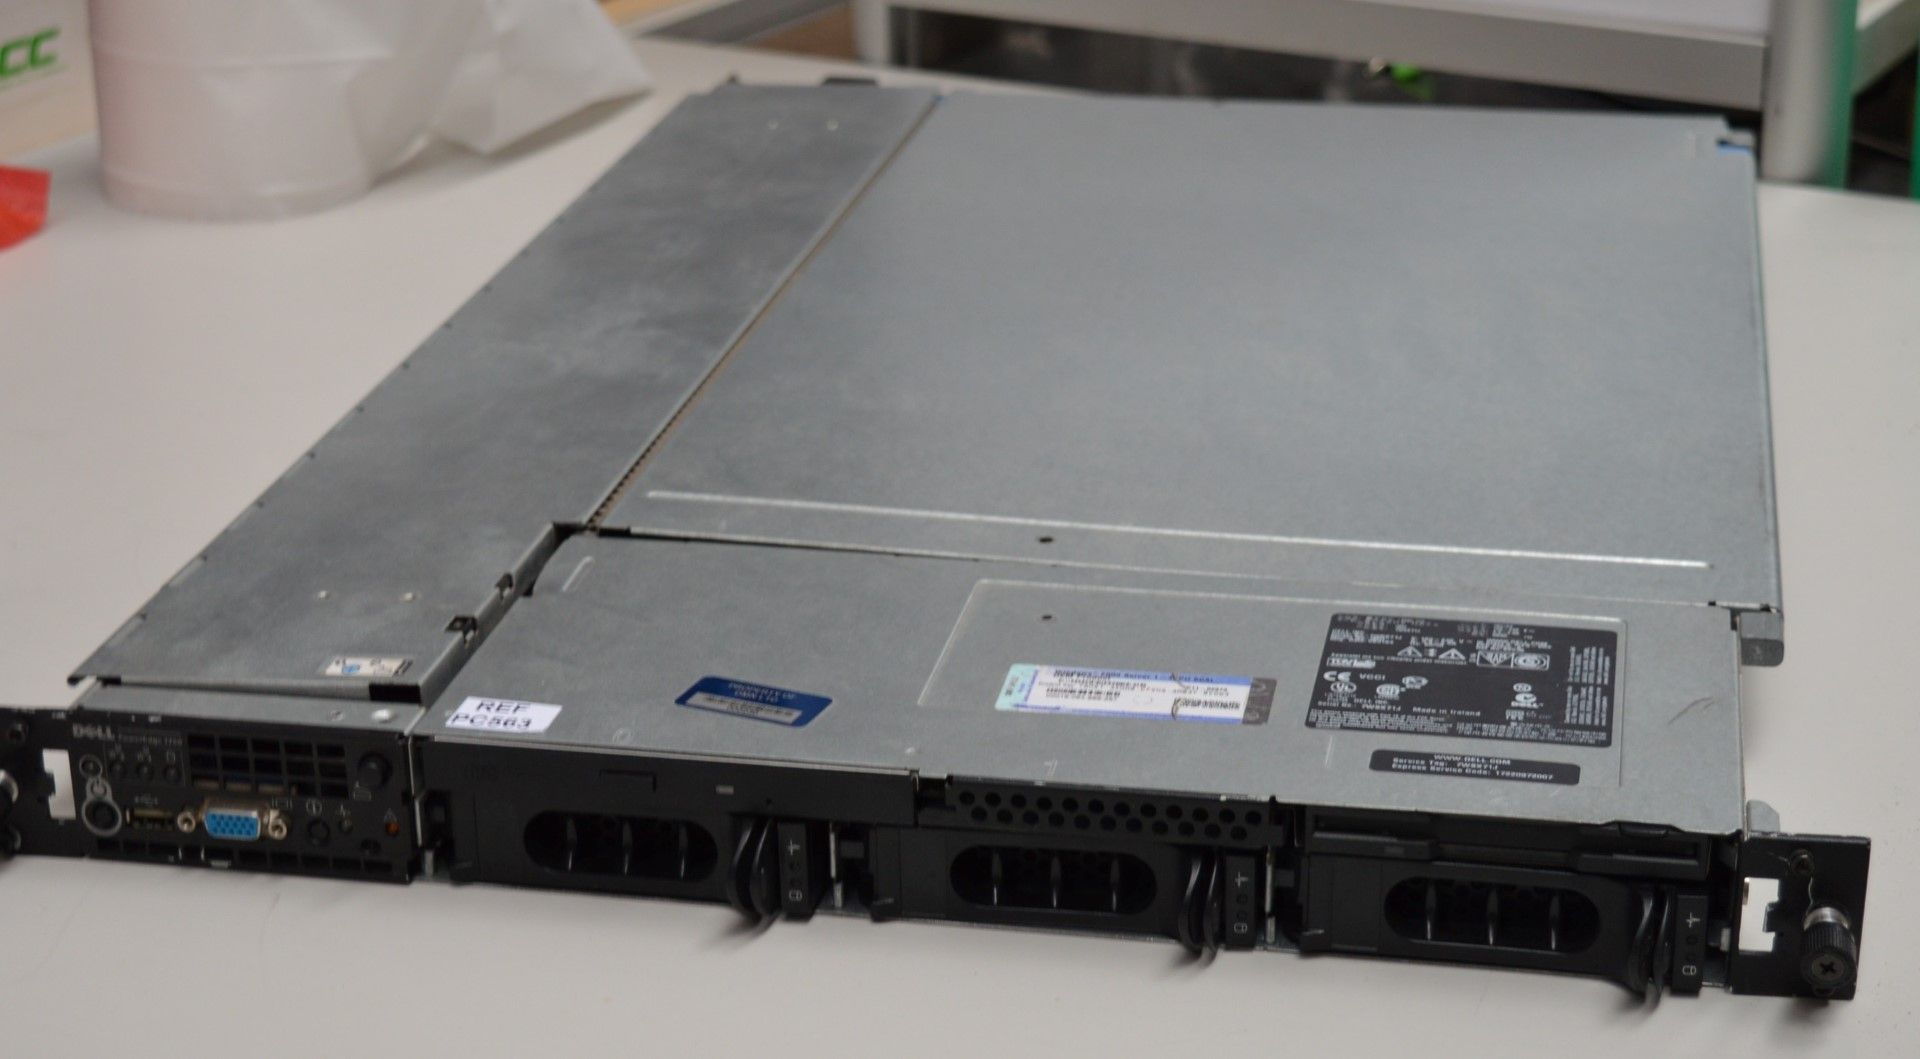 1 x Dell Power Edge 1750 Business Server - Dual Xeon Processors and 1gb Ram - Hard Disk Drives - Image 2 of 2